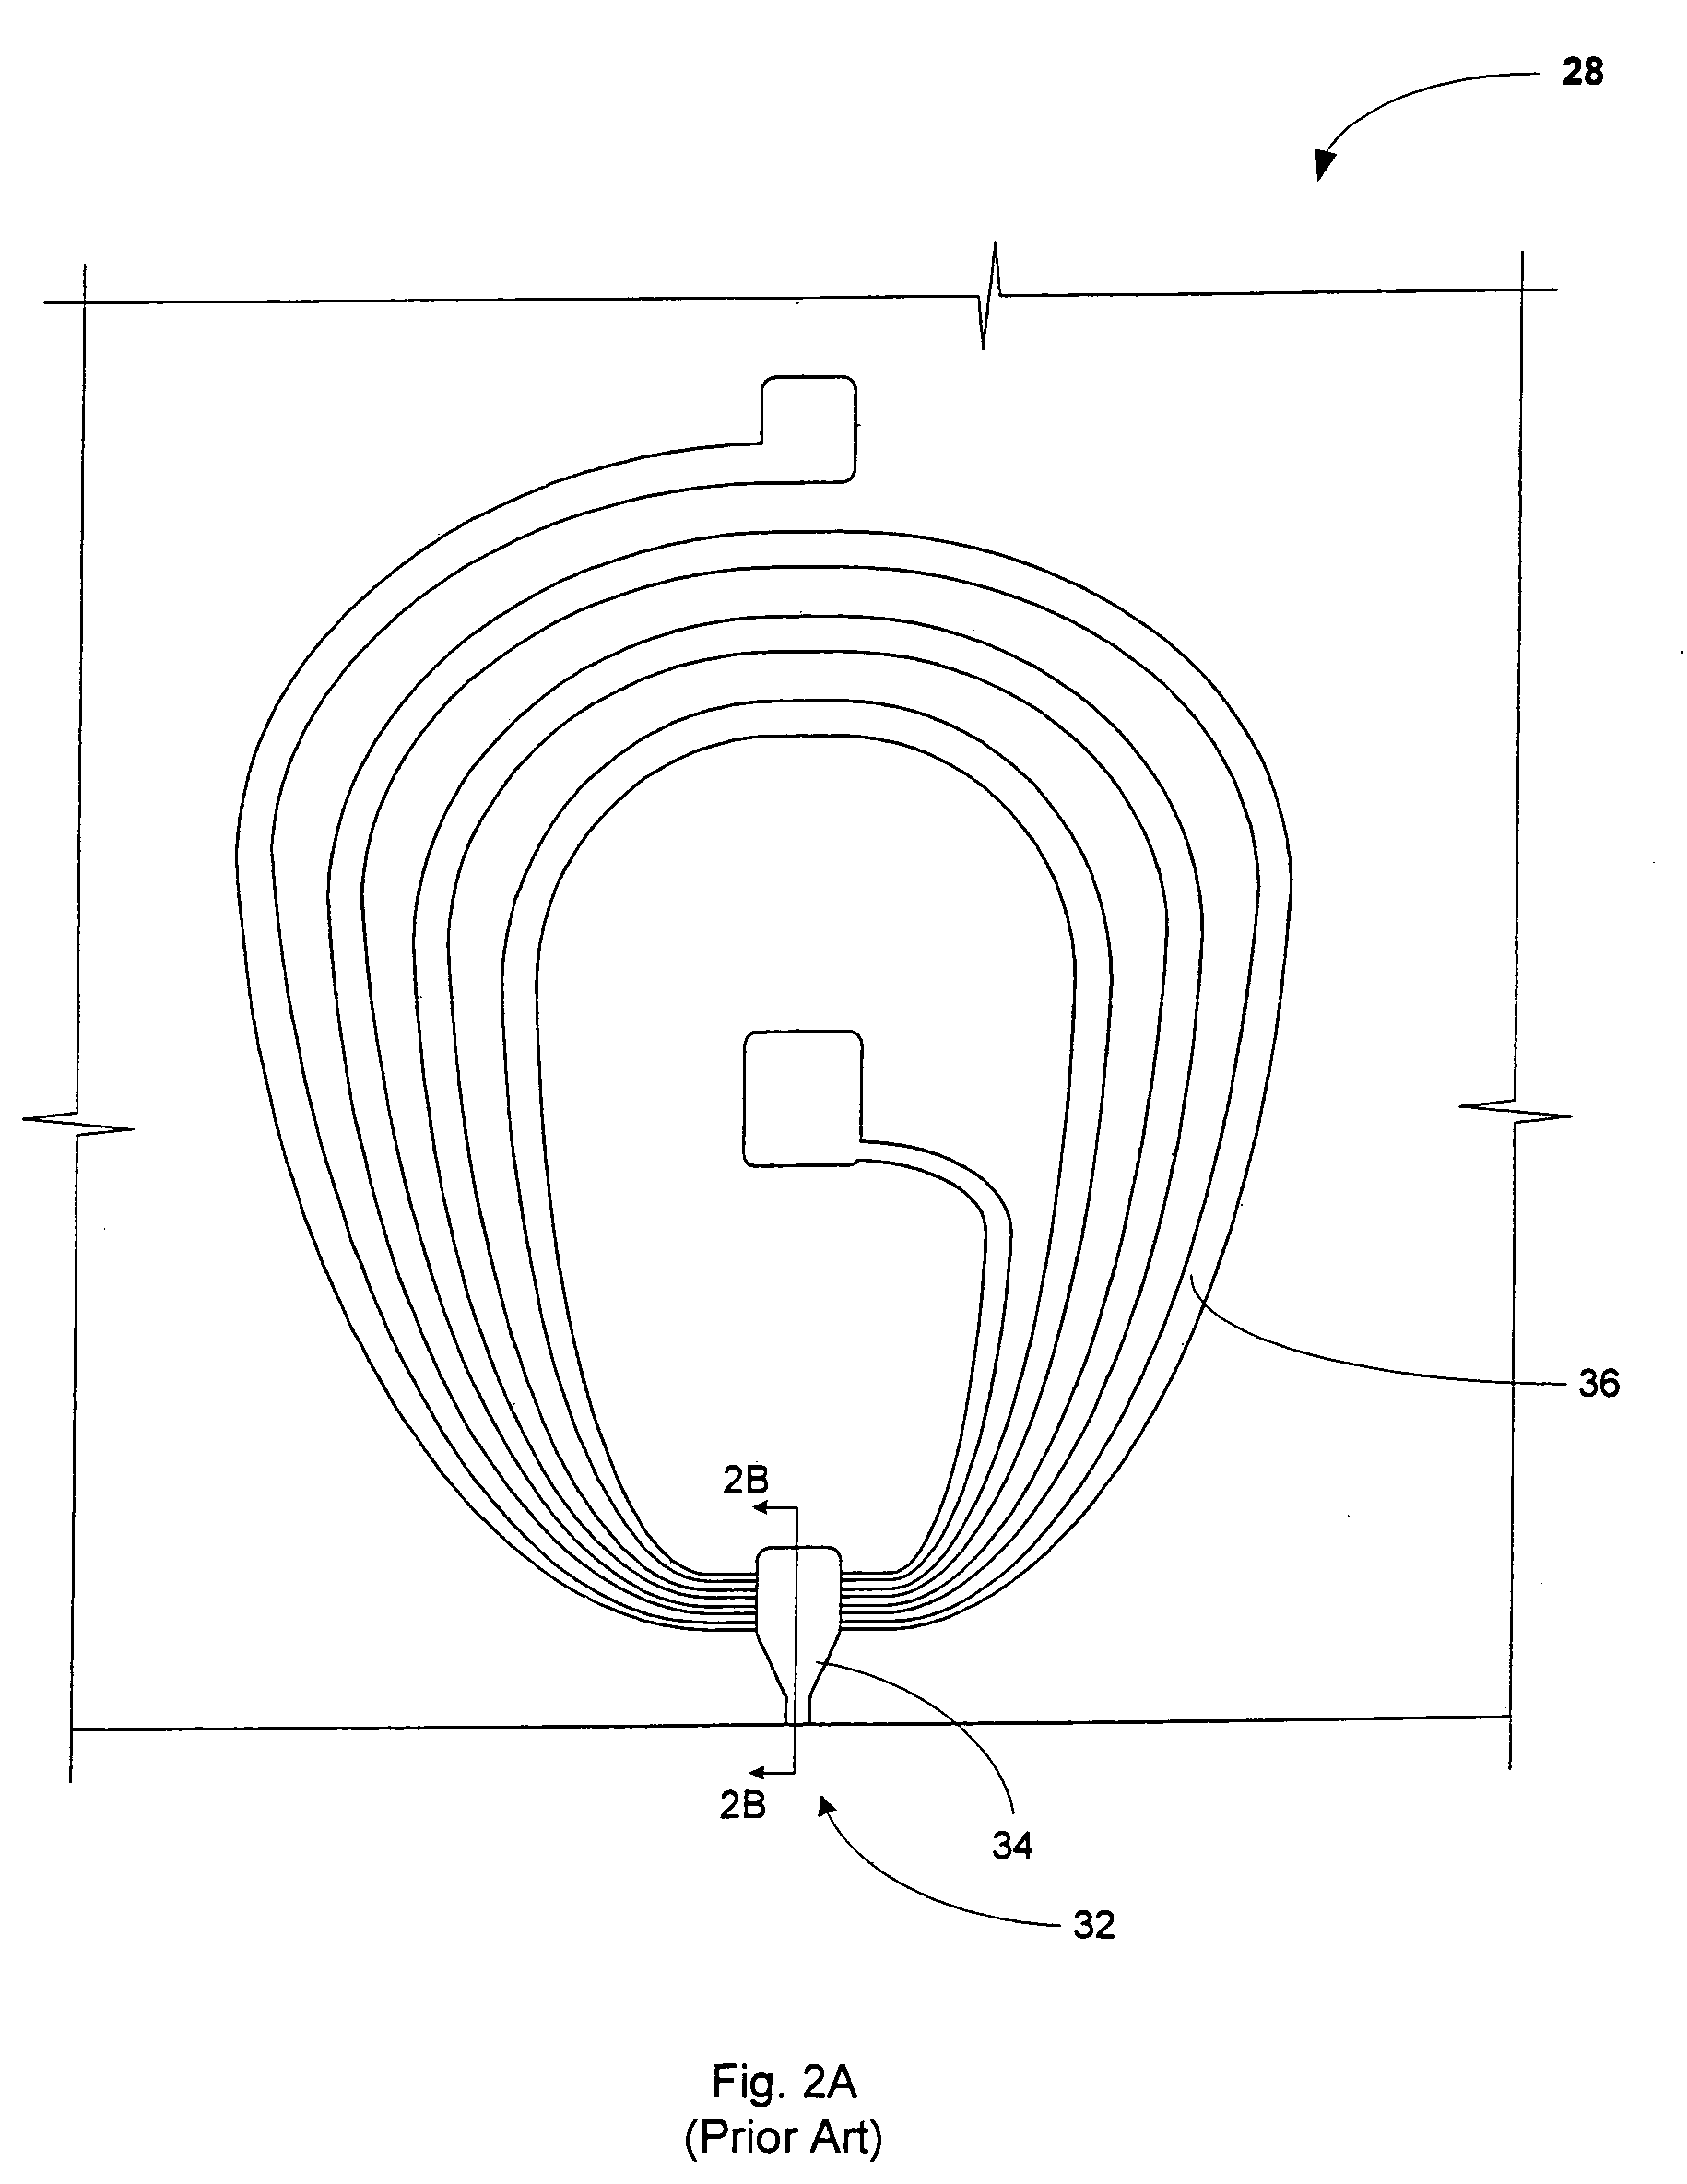 Inductive write head having high magnetic moment poles and low magnetic moment thin layer in the back gap, and methods for making